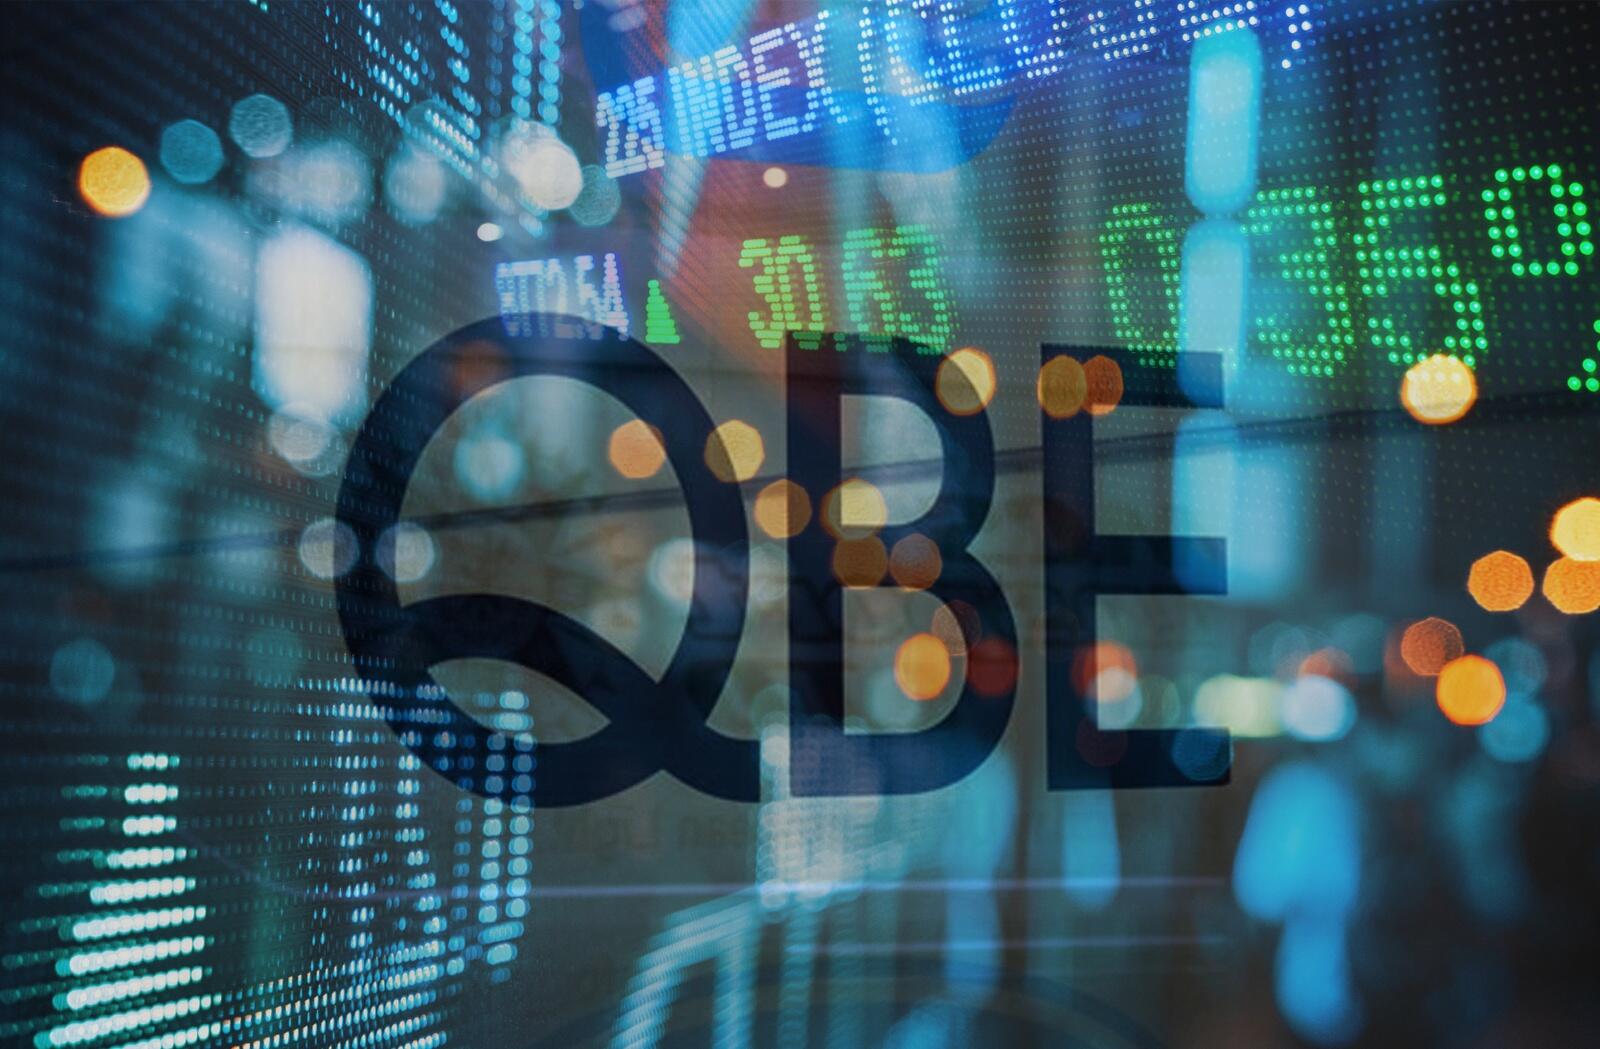 QBE results